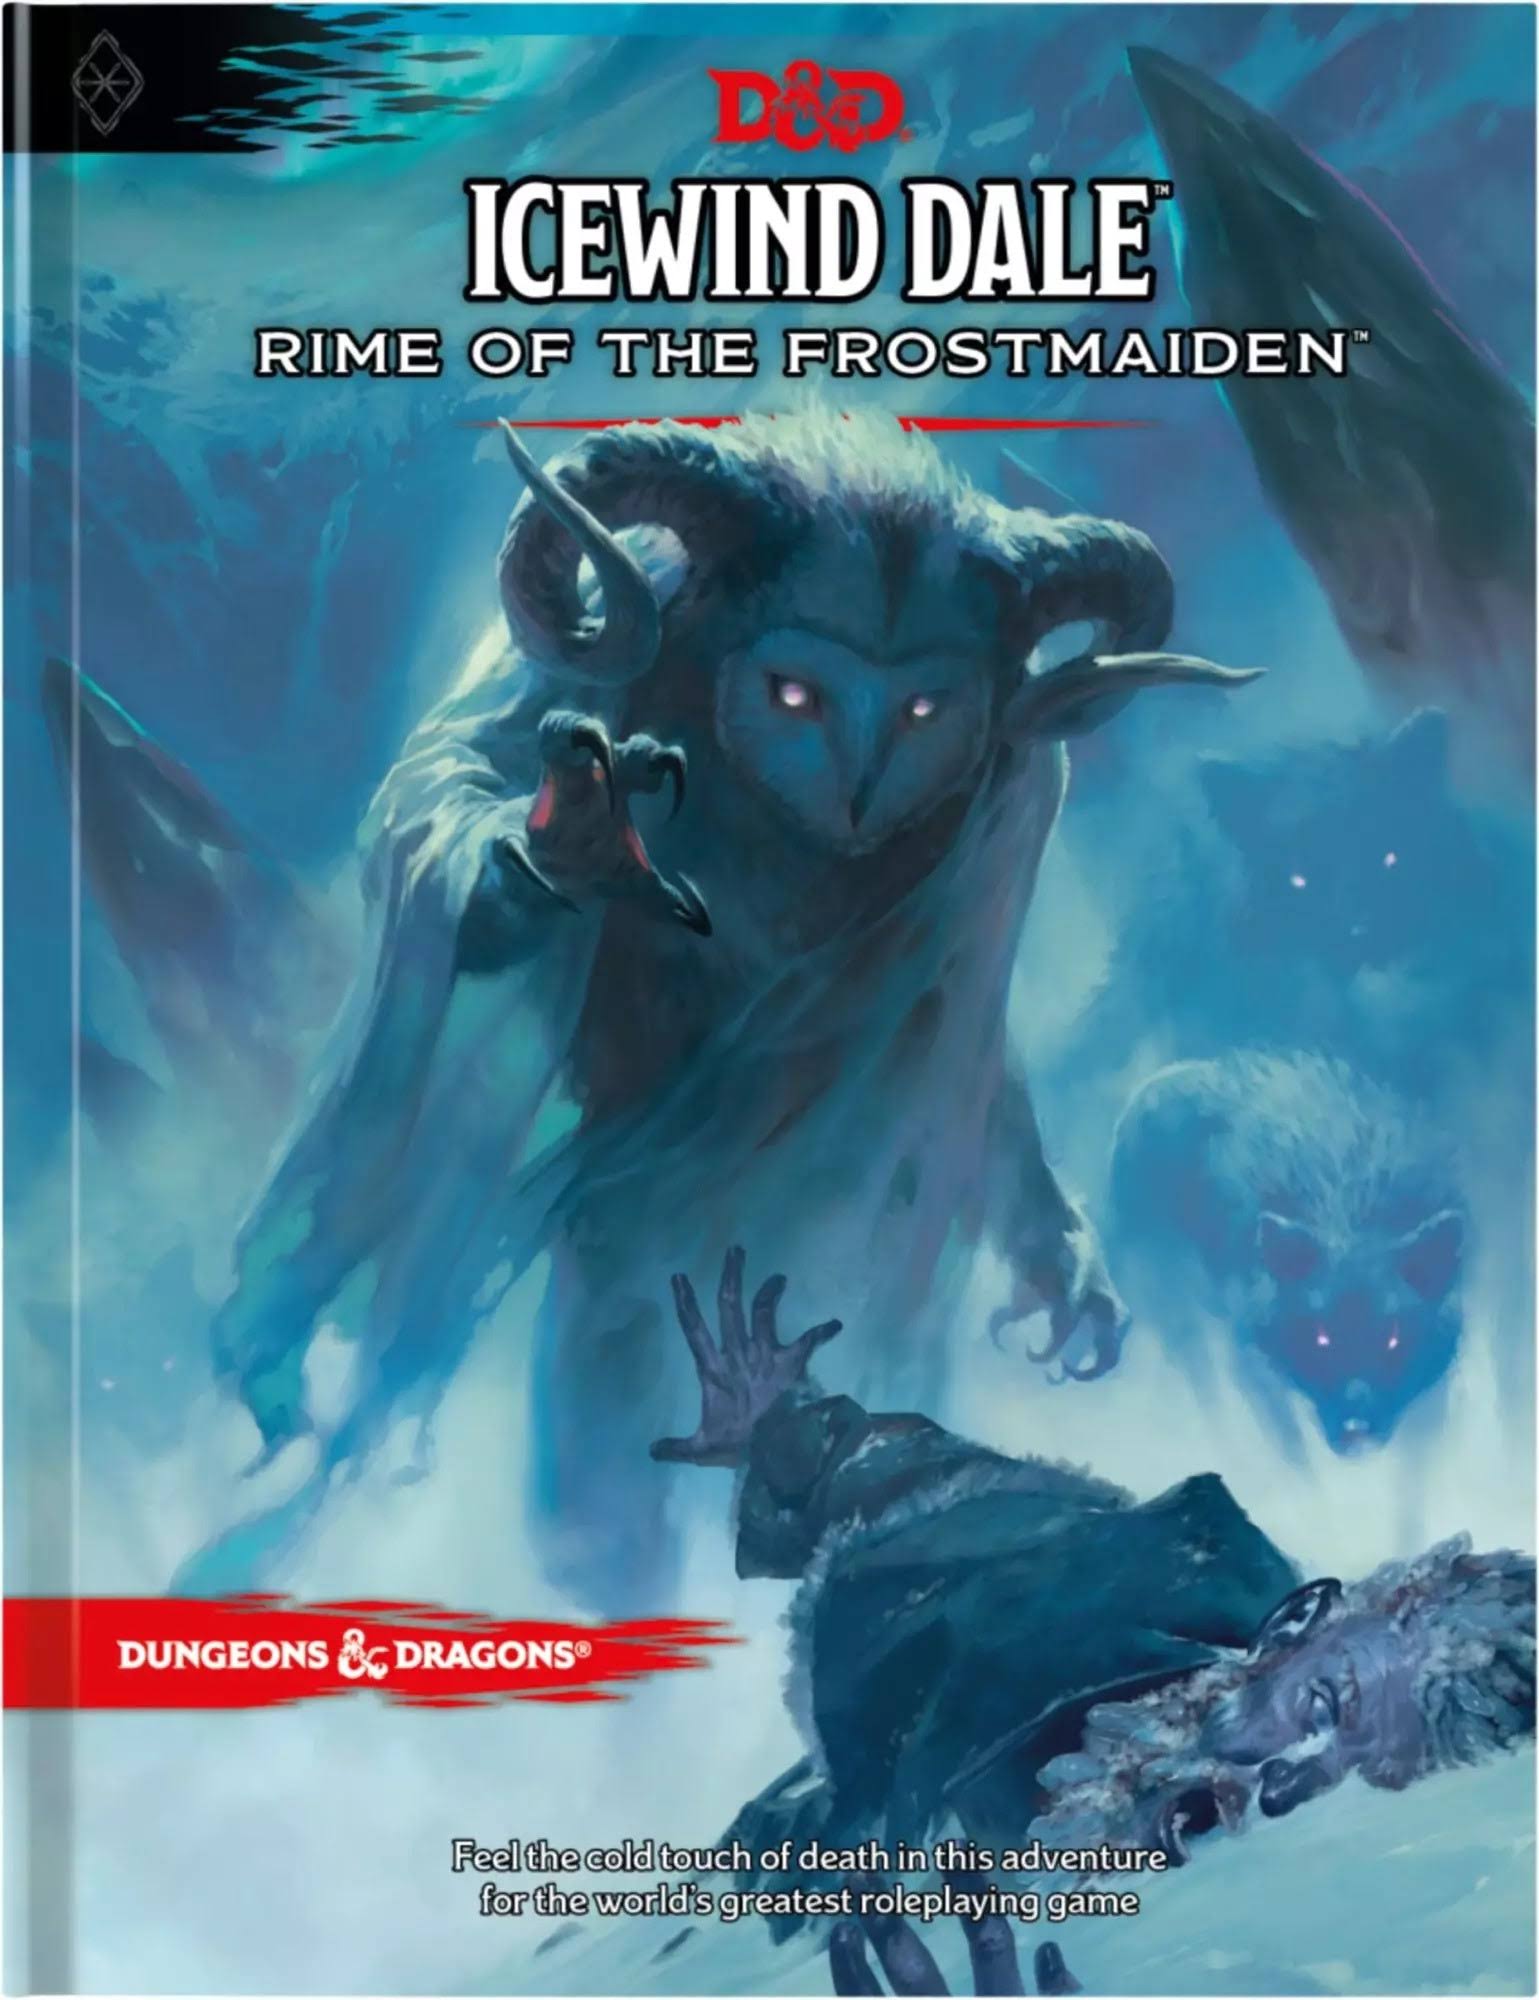 Dungeons & Dragons D&D Icewind Dale: Rime of the Frostmaiden RPG Game